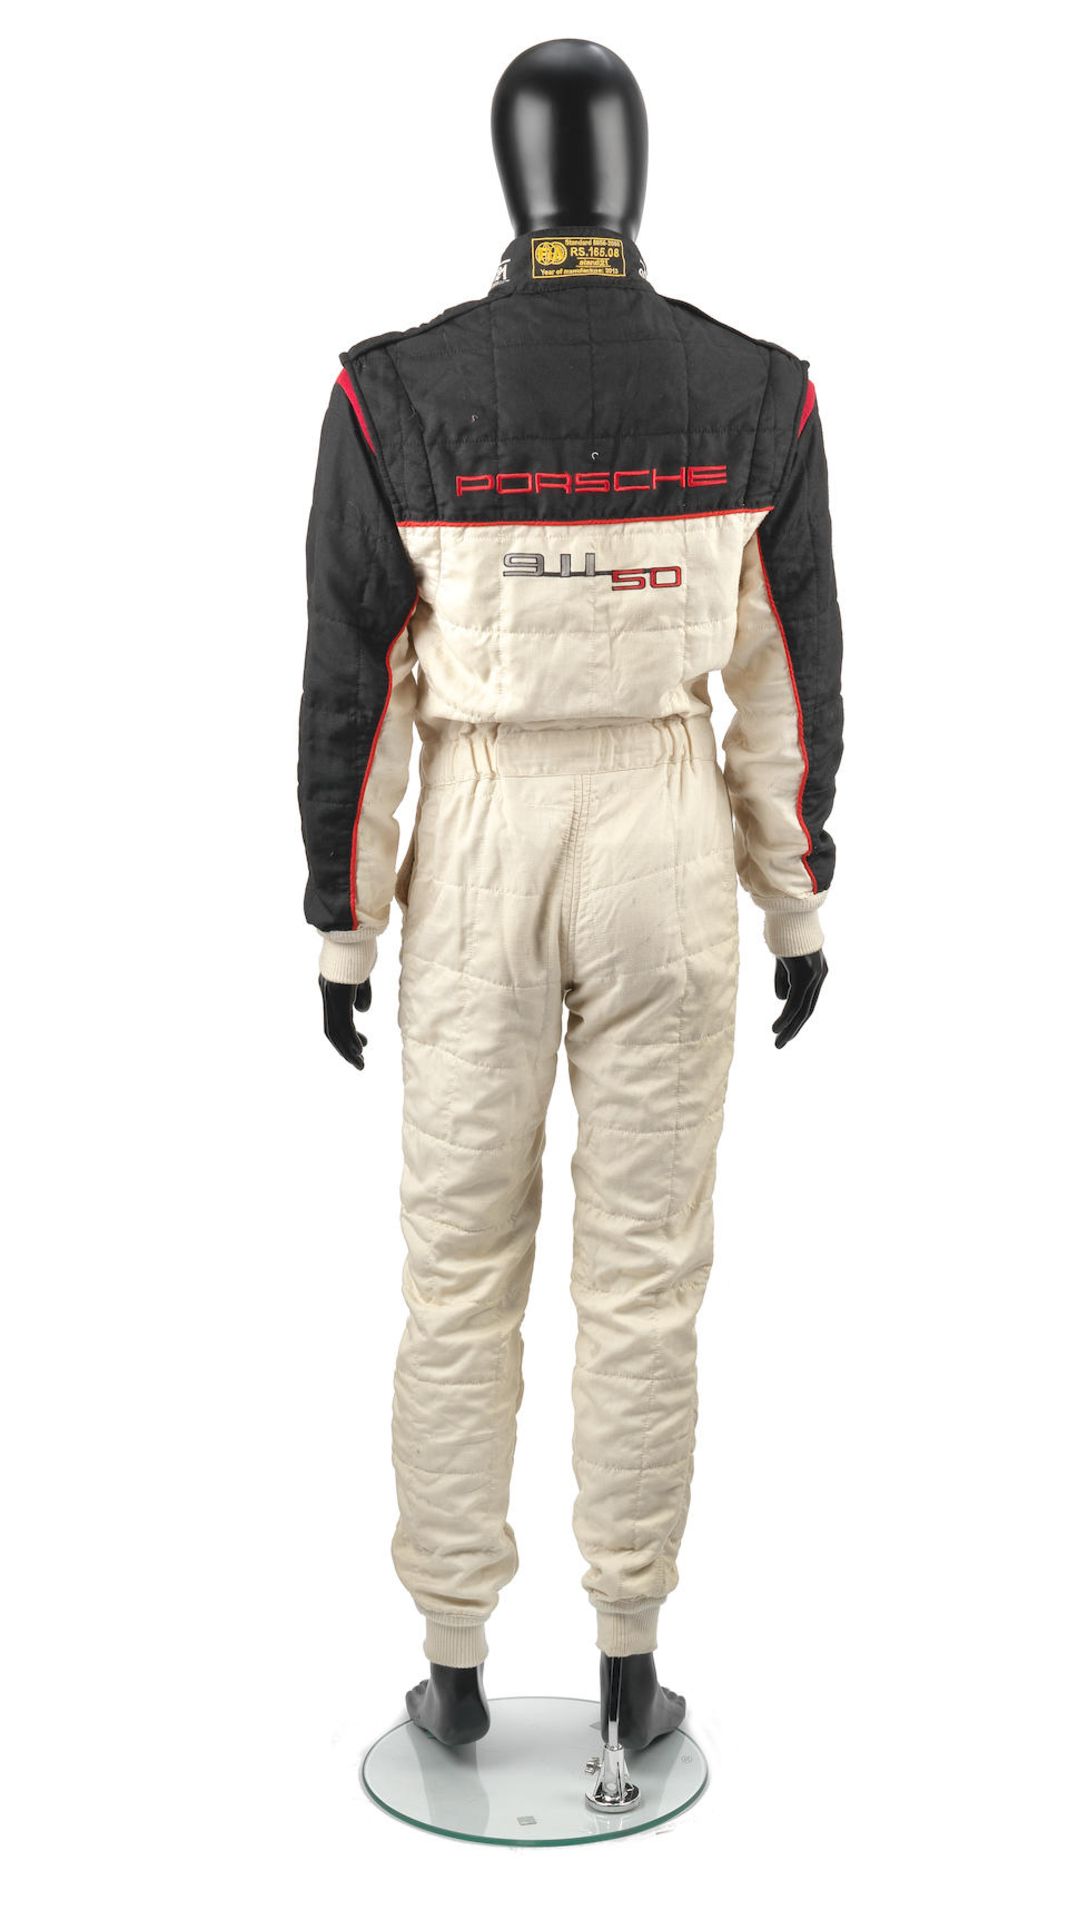 A set of Richard Attwood's Porsche 911 50th Anniversary race overalls by Stand 21, 2013, ((2)) - Image 2 of 3